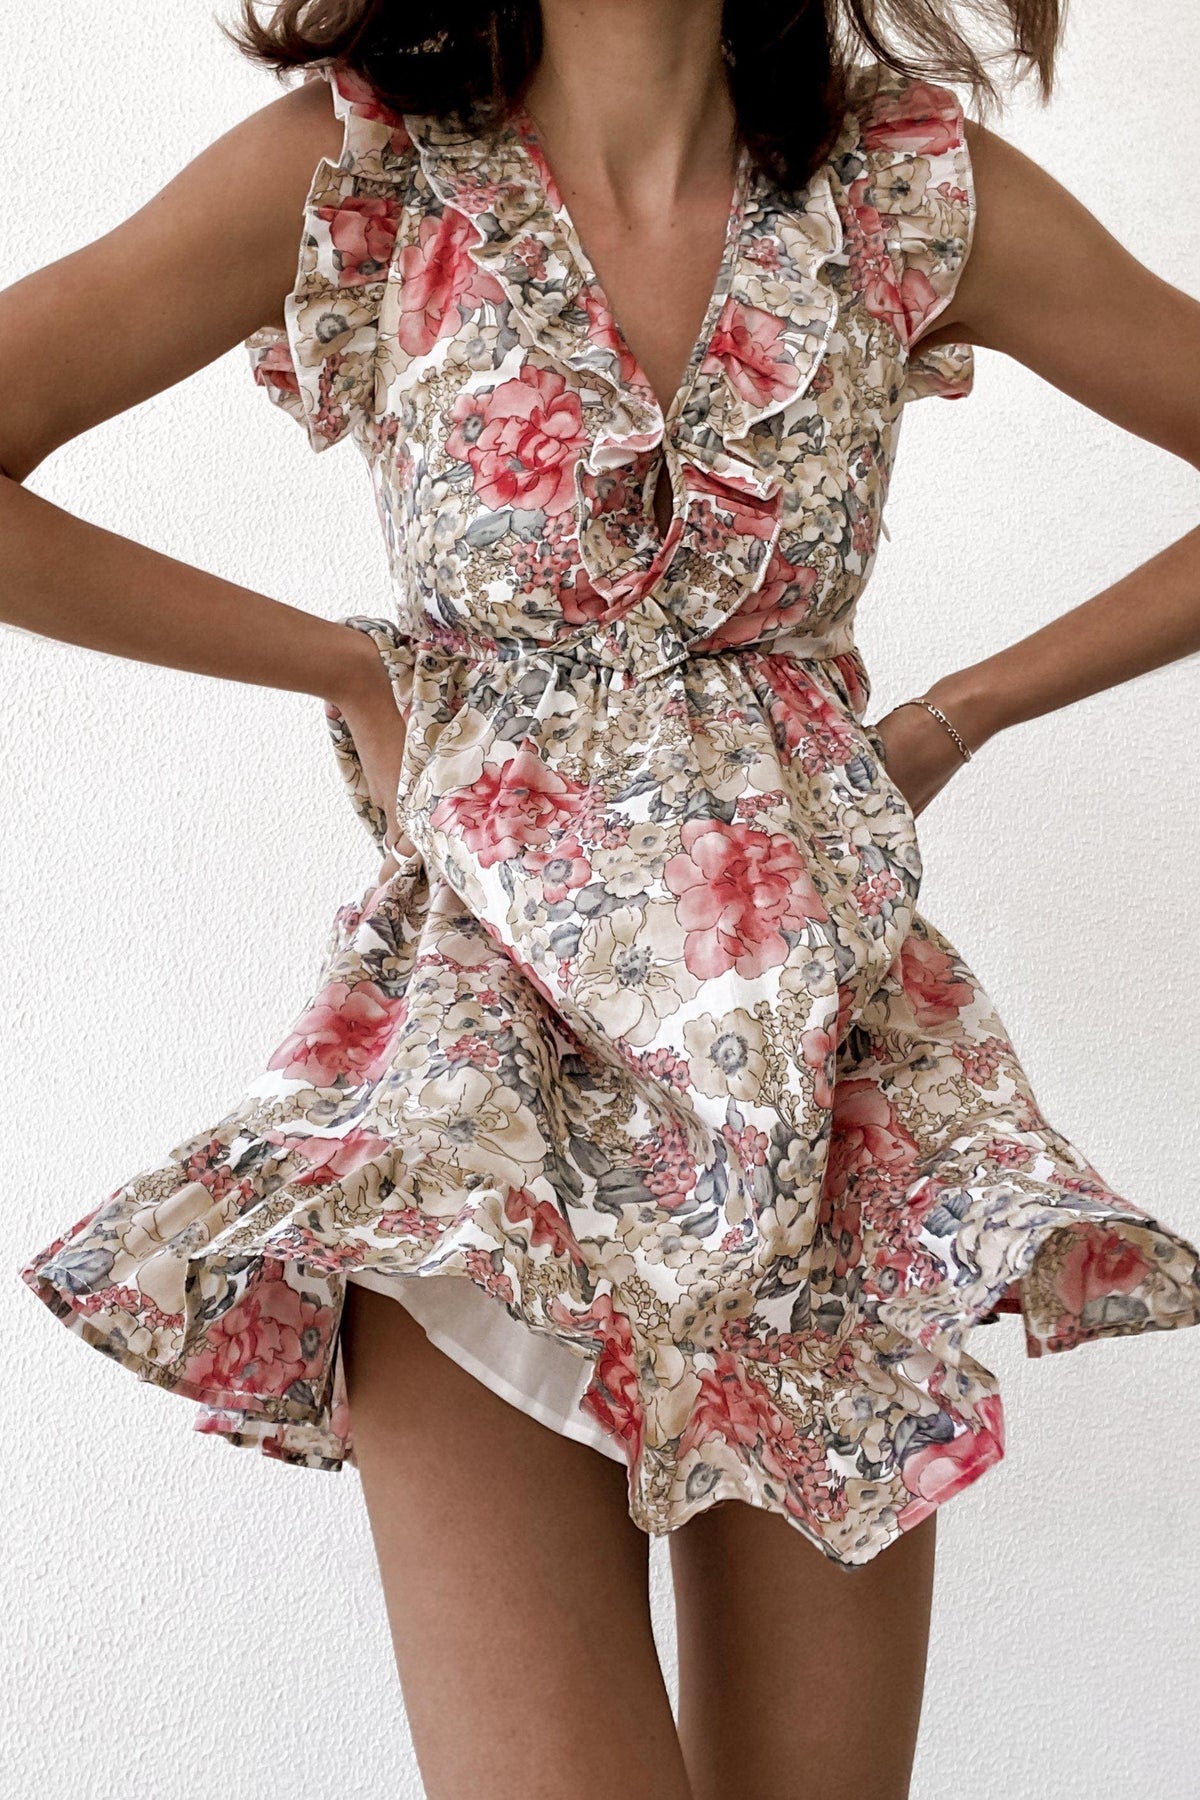 Innerbloom Dress, BOHO, DRESS, DRESSES, FLORAL, NEW ARRIVALS, PINK, PRINT, RUFFLE, Sale, TIE UP, YELLOW, Innerbloom Dress only $49.00 @ MISHKAH ONLINE FASHION BOUTIQUE, Shop The Latest Women&#39;s Dresses - Our New Innerbloom Dress is only $49.00, @ MISHKAH ONLINE FASHION BOUTIQUE-MISHKAH